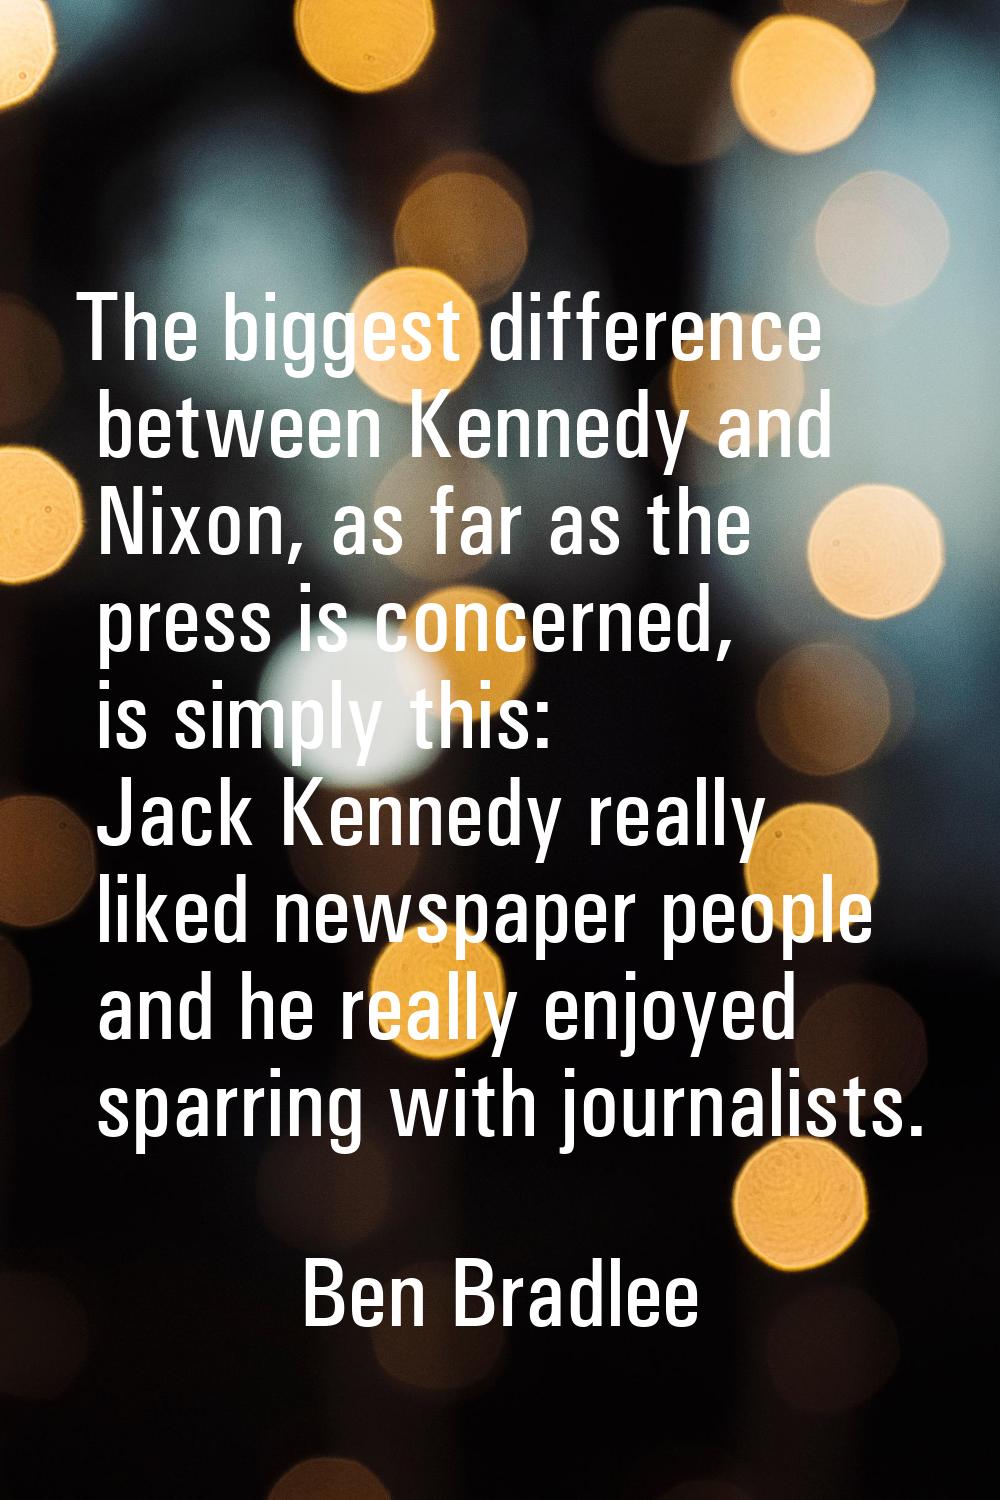 The biggest difference between Kennedy and Nixon, as far as the press is concerned, is simply this: